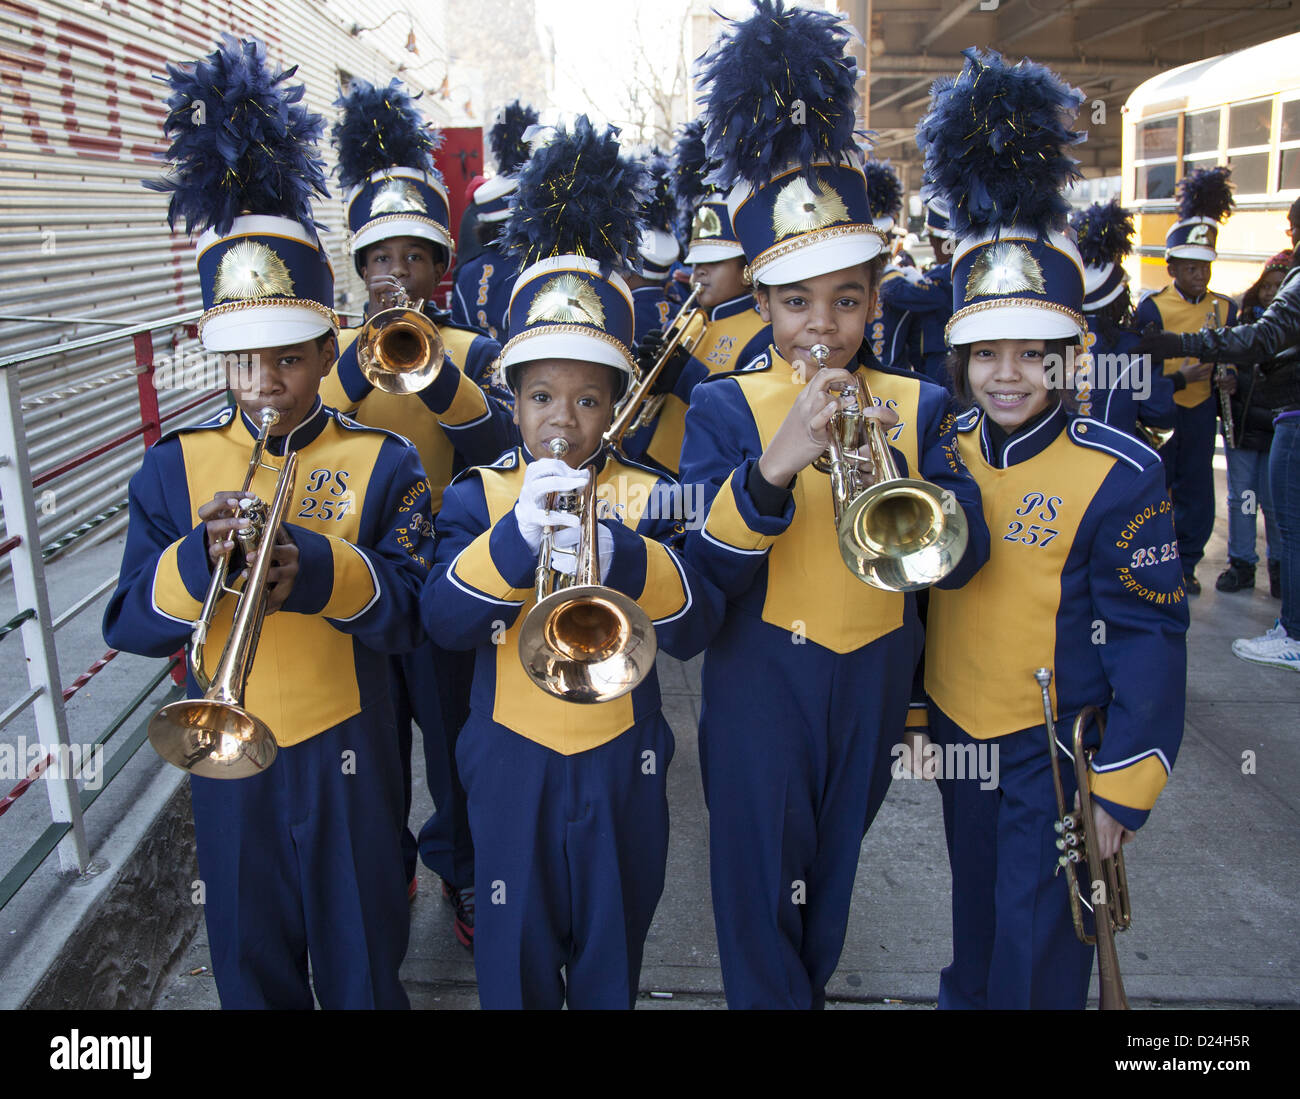 Members of the PS 257 elementary school marching band perform at the 3 Kings Day Parade in Brooklyn, NY. Stock Photo